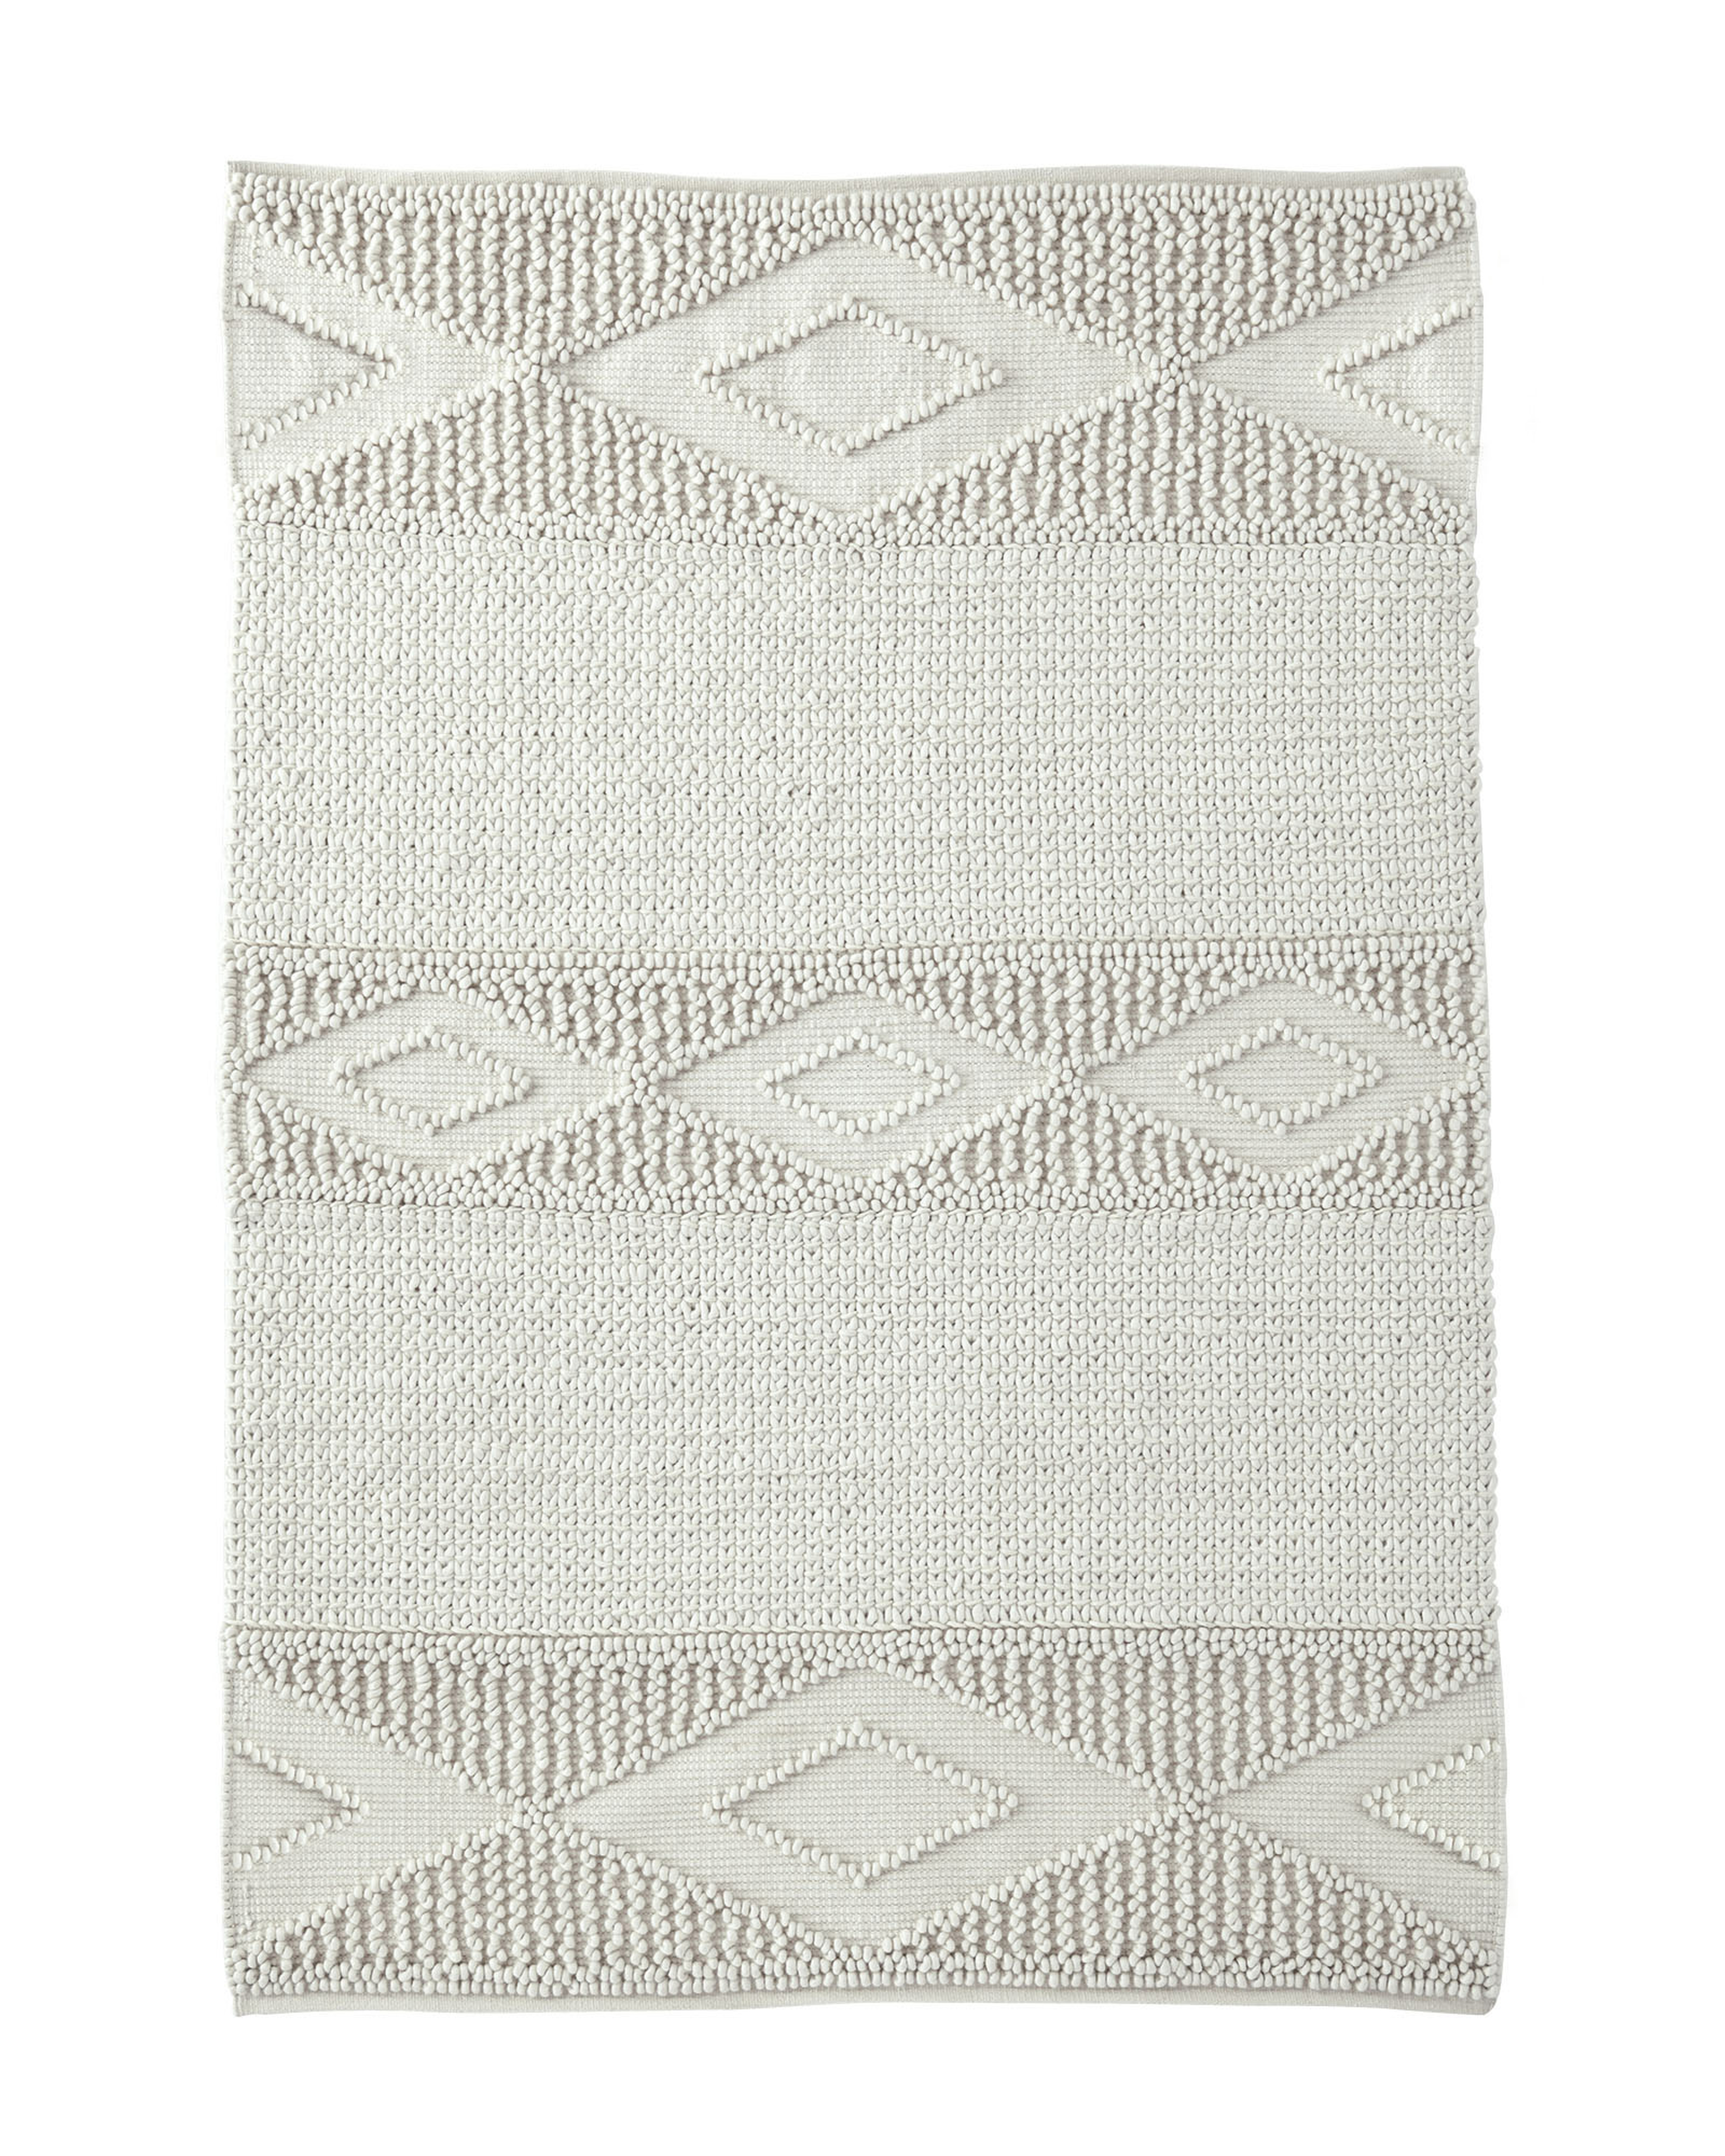 Macramé Wool Rug - Ivory - 5' x 7' - Serena and Lily